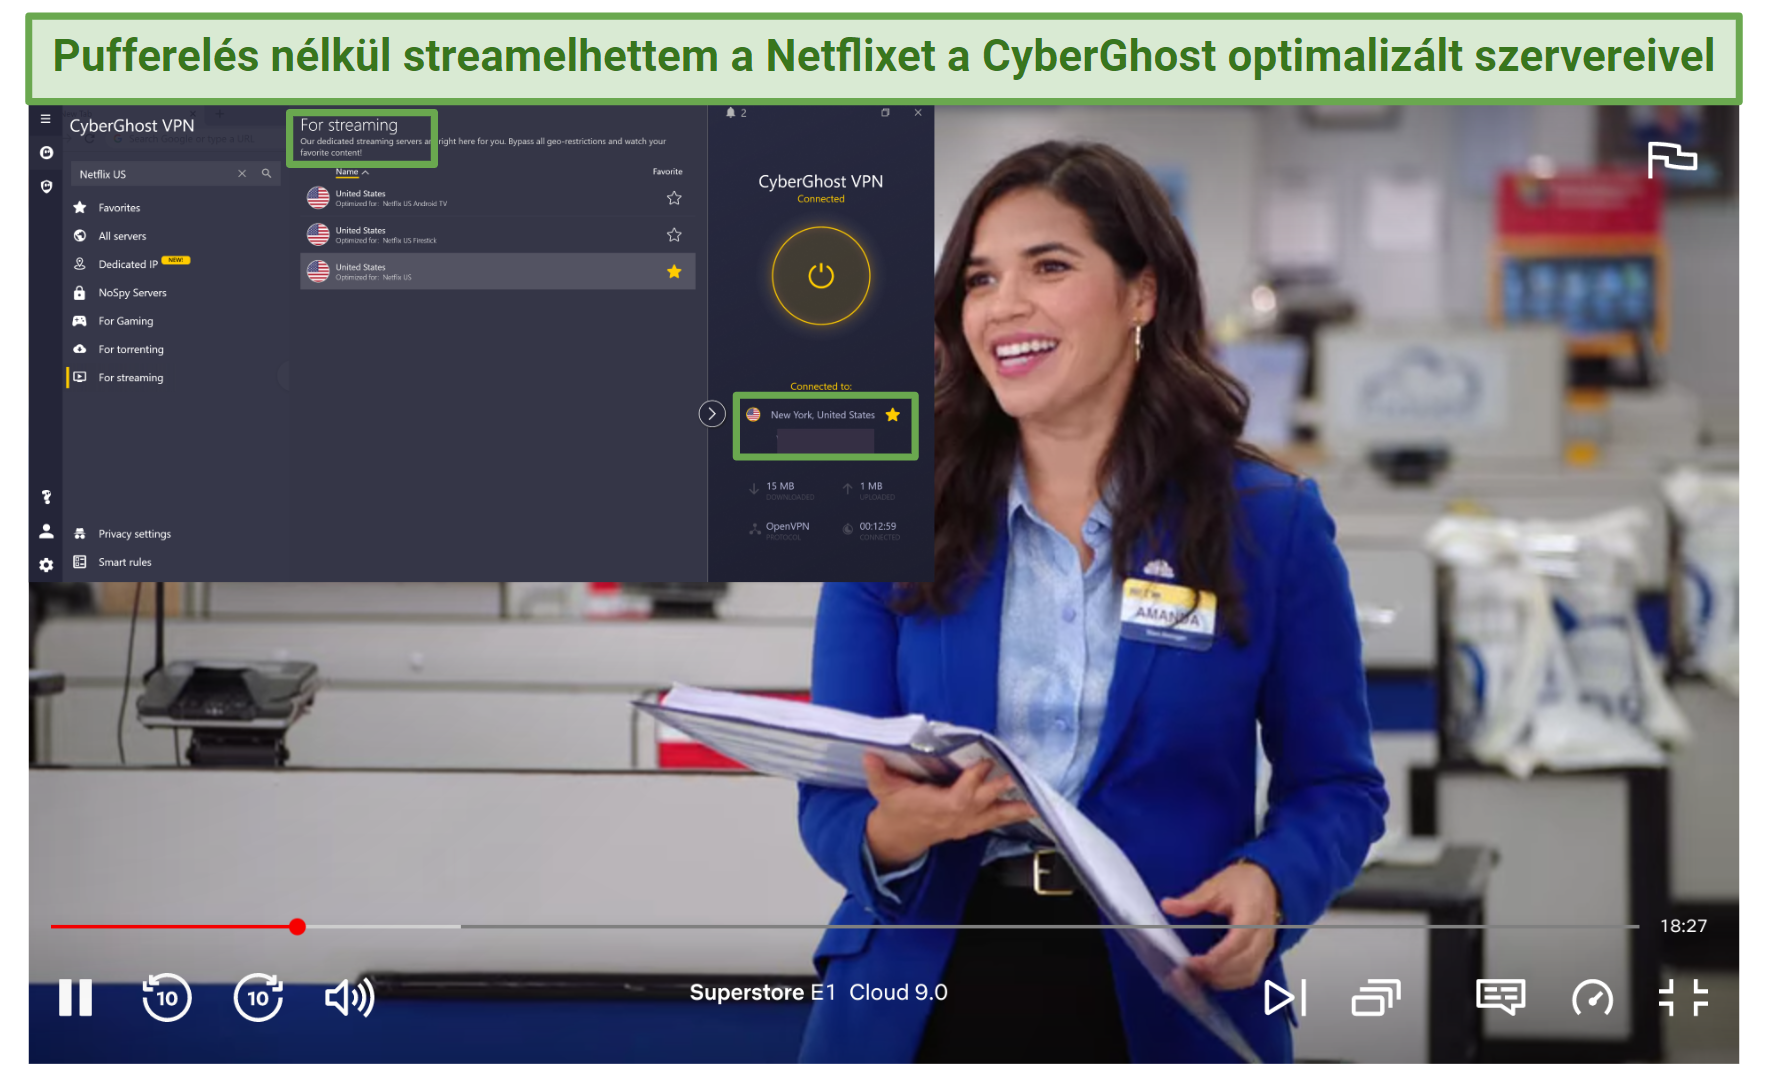 CyberGhost's streaming optimized servers for Netflix